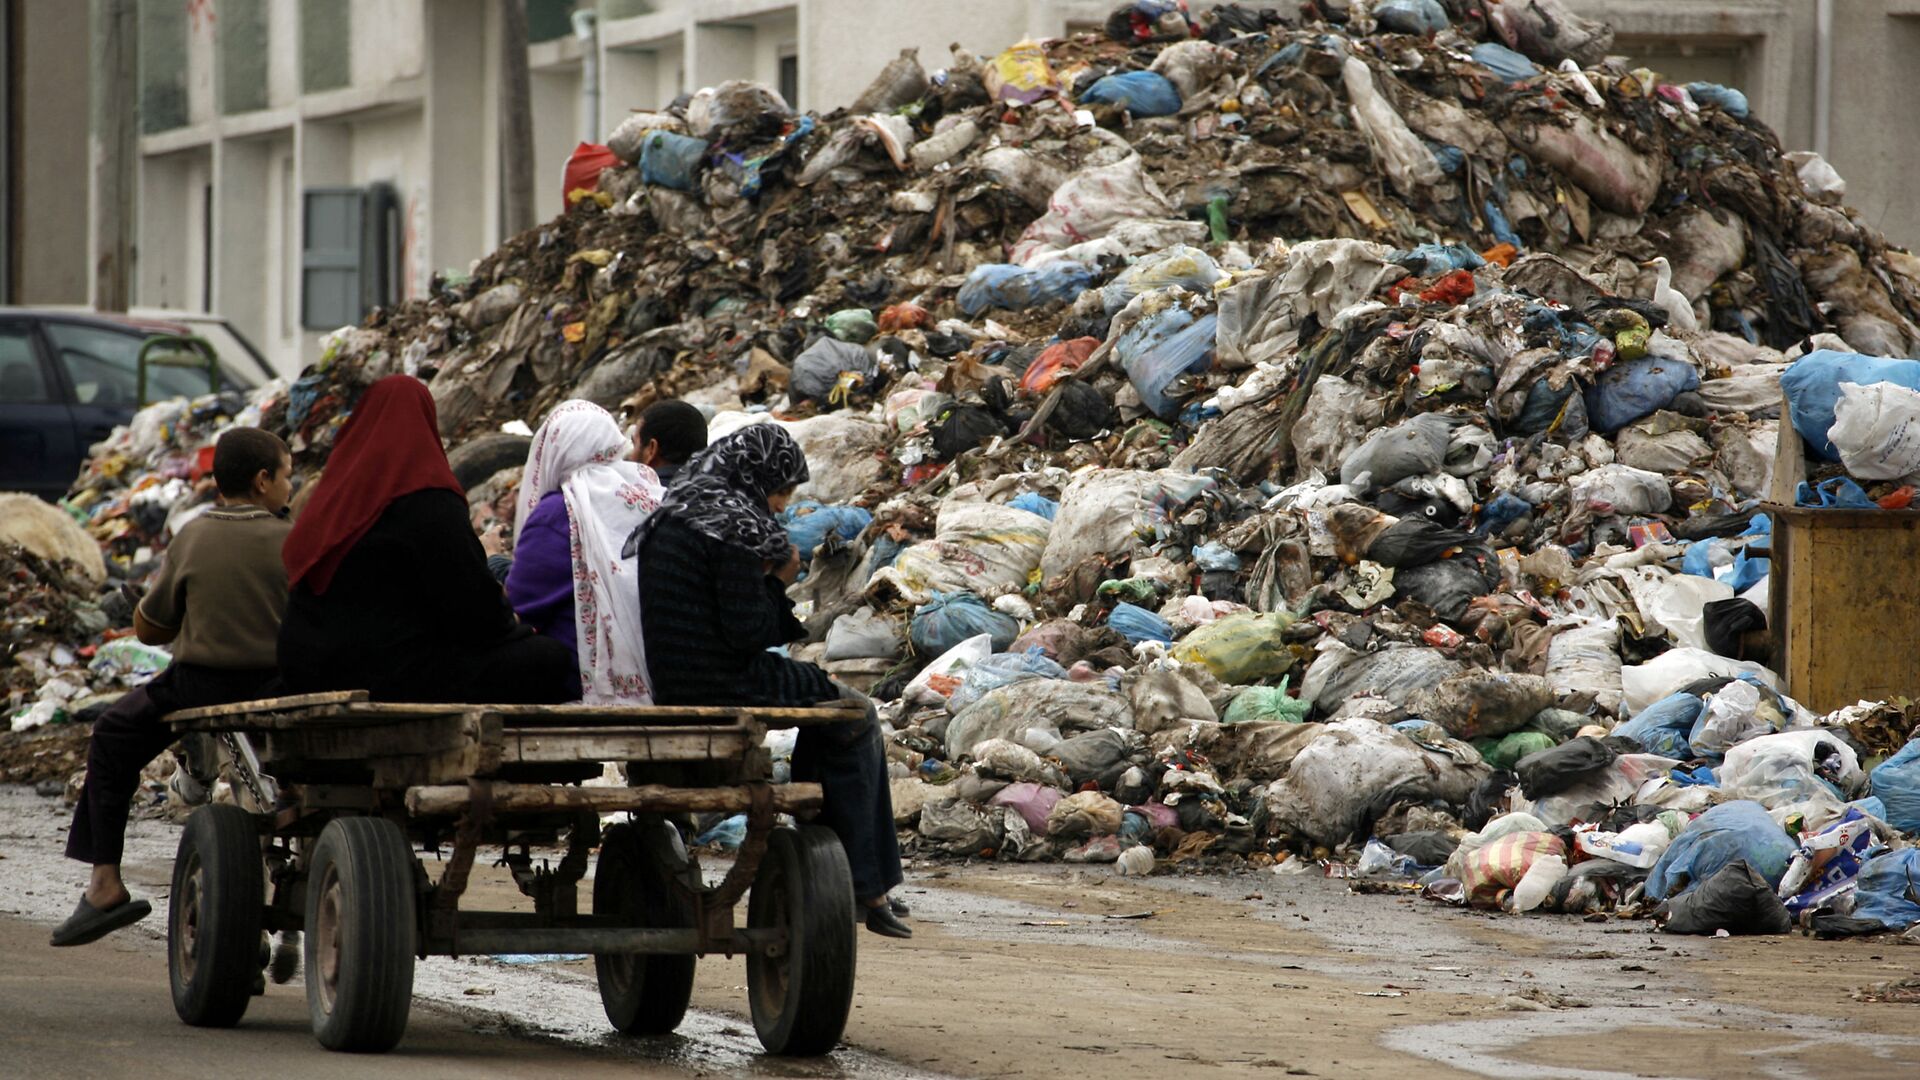 Palestinian women riding a donkey cart drive past a garbage dump in Beit Lahia on the Gaza Strip on January 20, 2009. The garbage has started to pill up in the streets as municipality services are still not available. (Photo by PATRICK BAZ / POOL / AFP) - Sputnik International, 1920, 07.07.2022